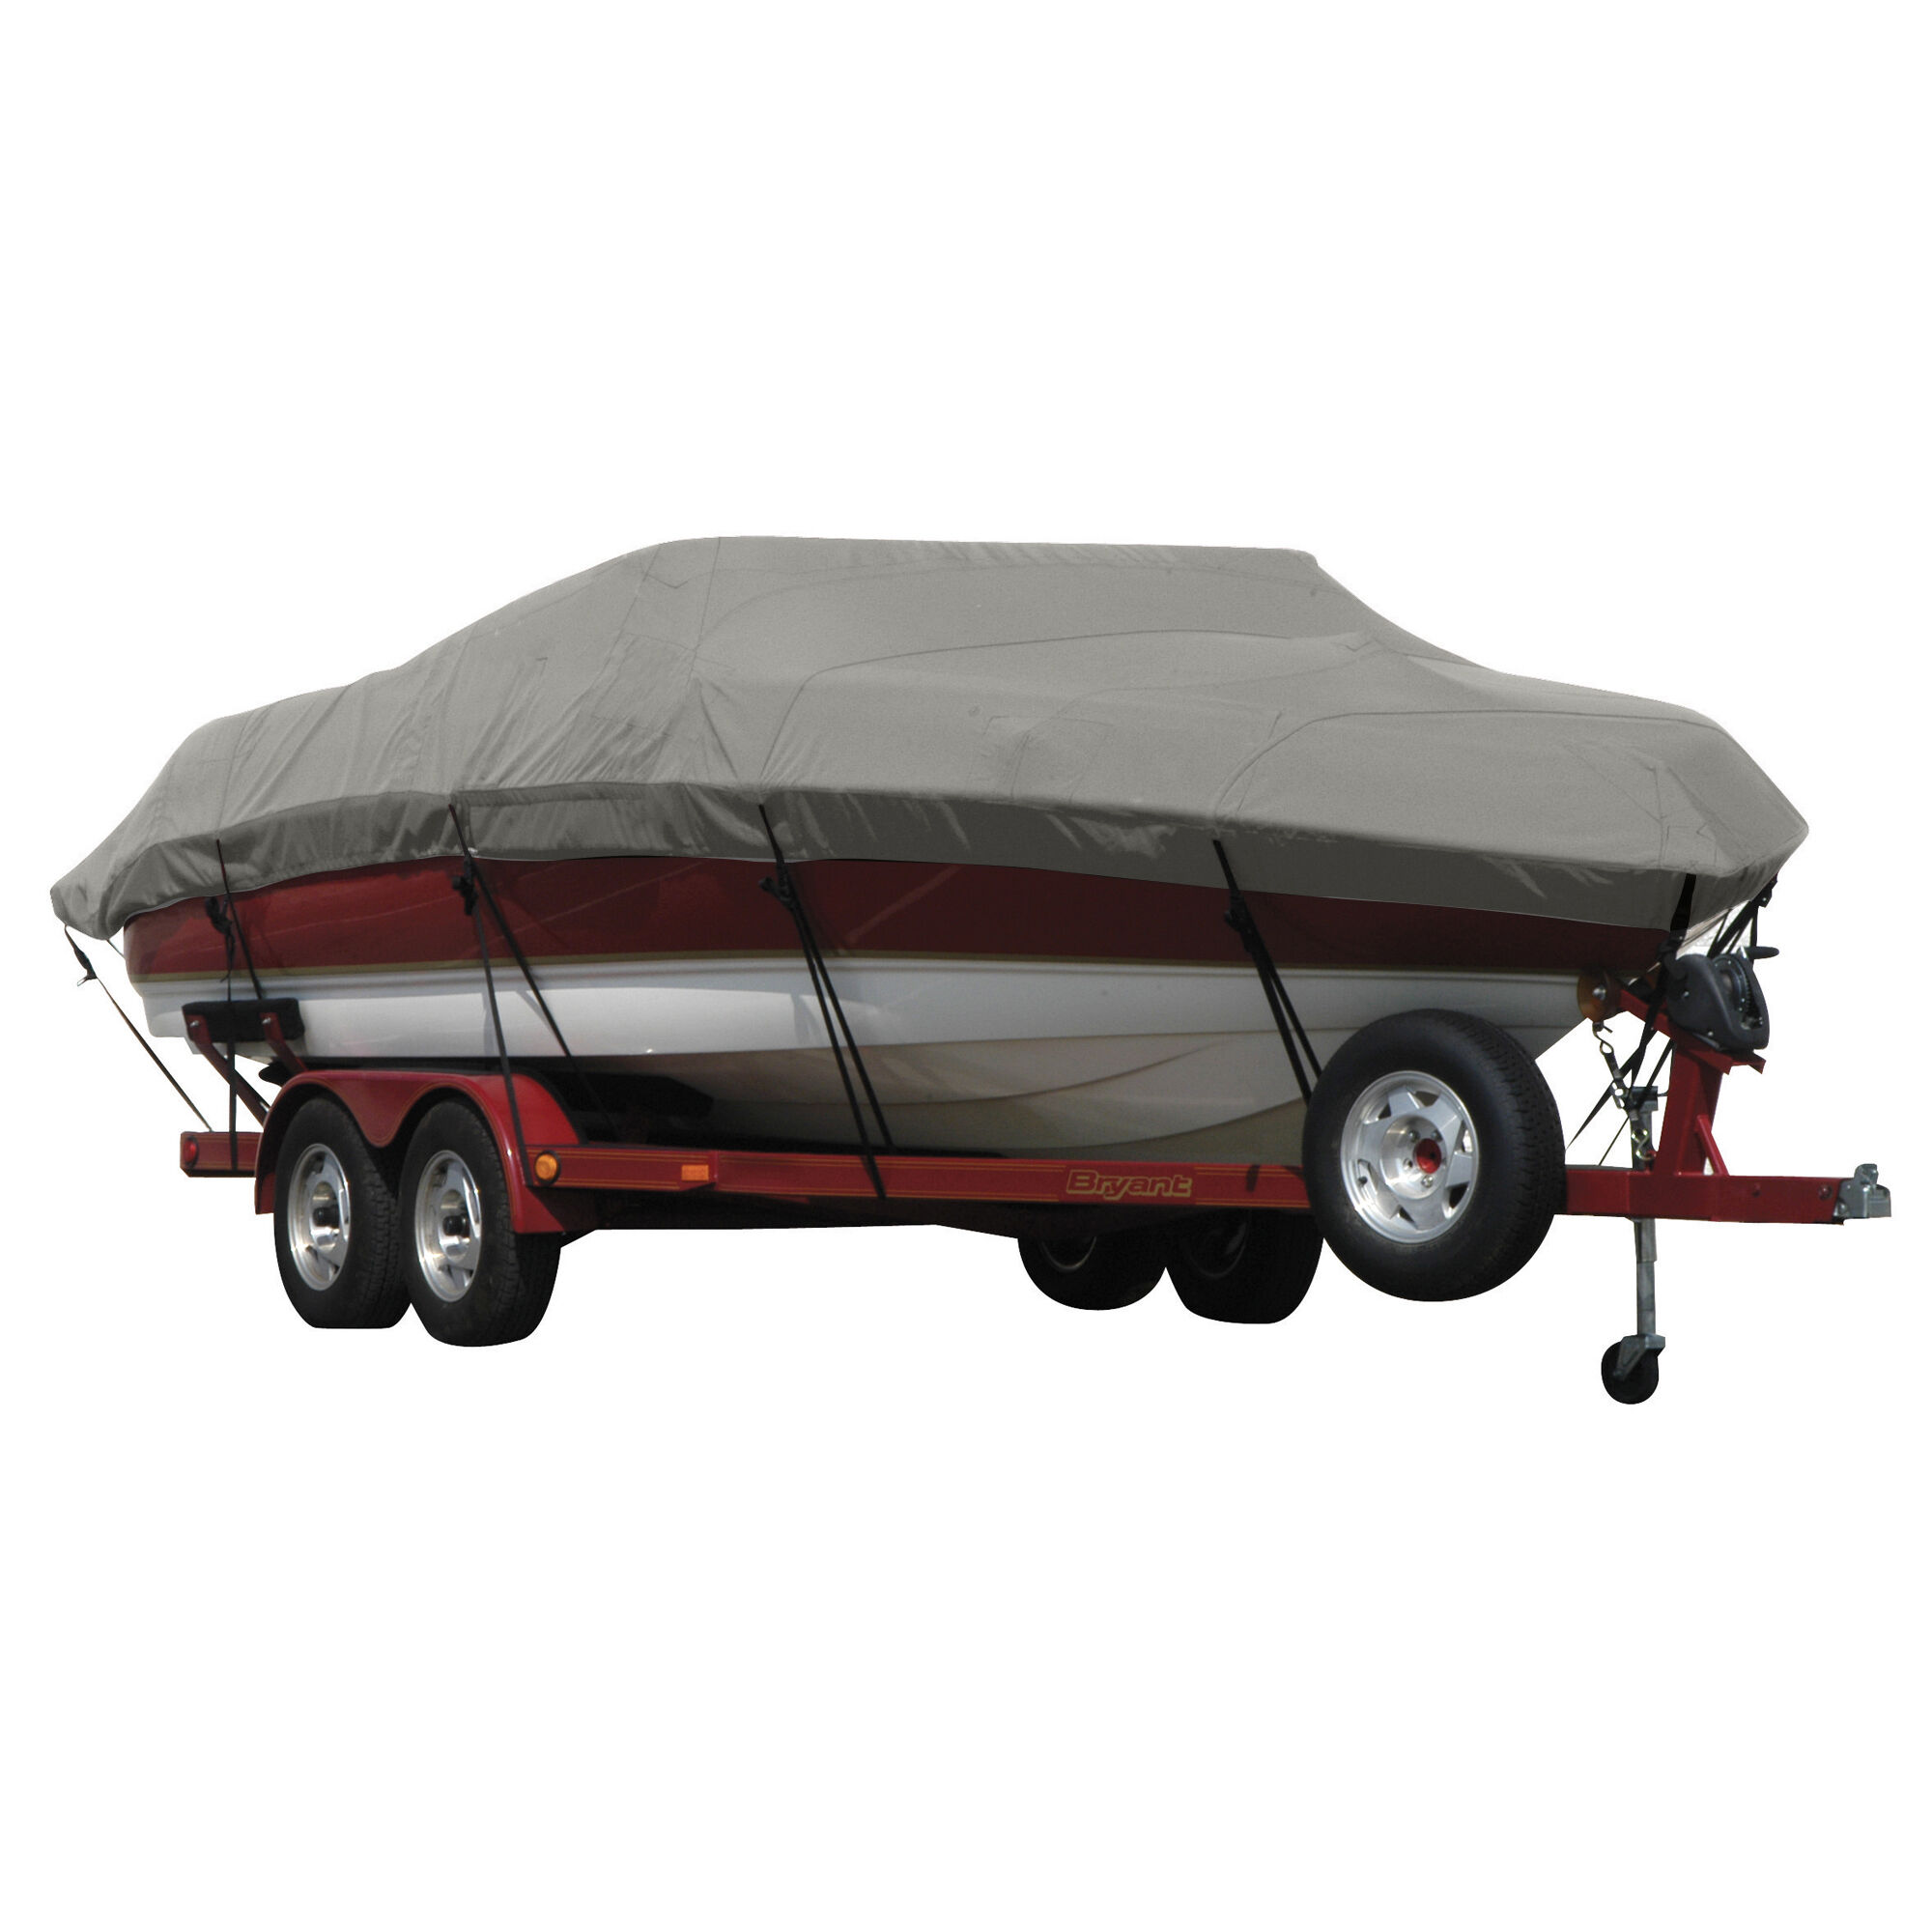 Covermate Exact Fit Sunbrella Boat Cover for Caribe Inflatables Dl-15 Dl-15 O/B. Charcoal Grey Heather in Charcoal Grey Heather